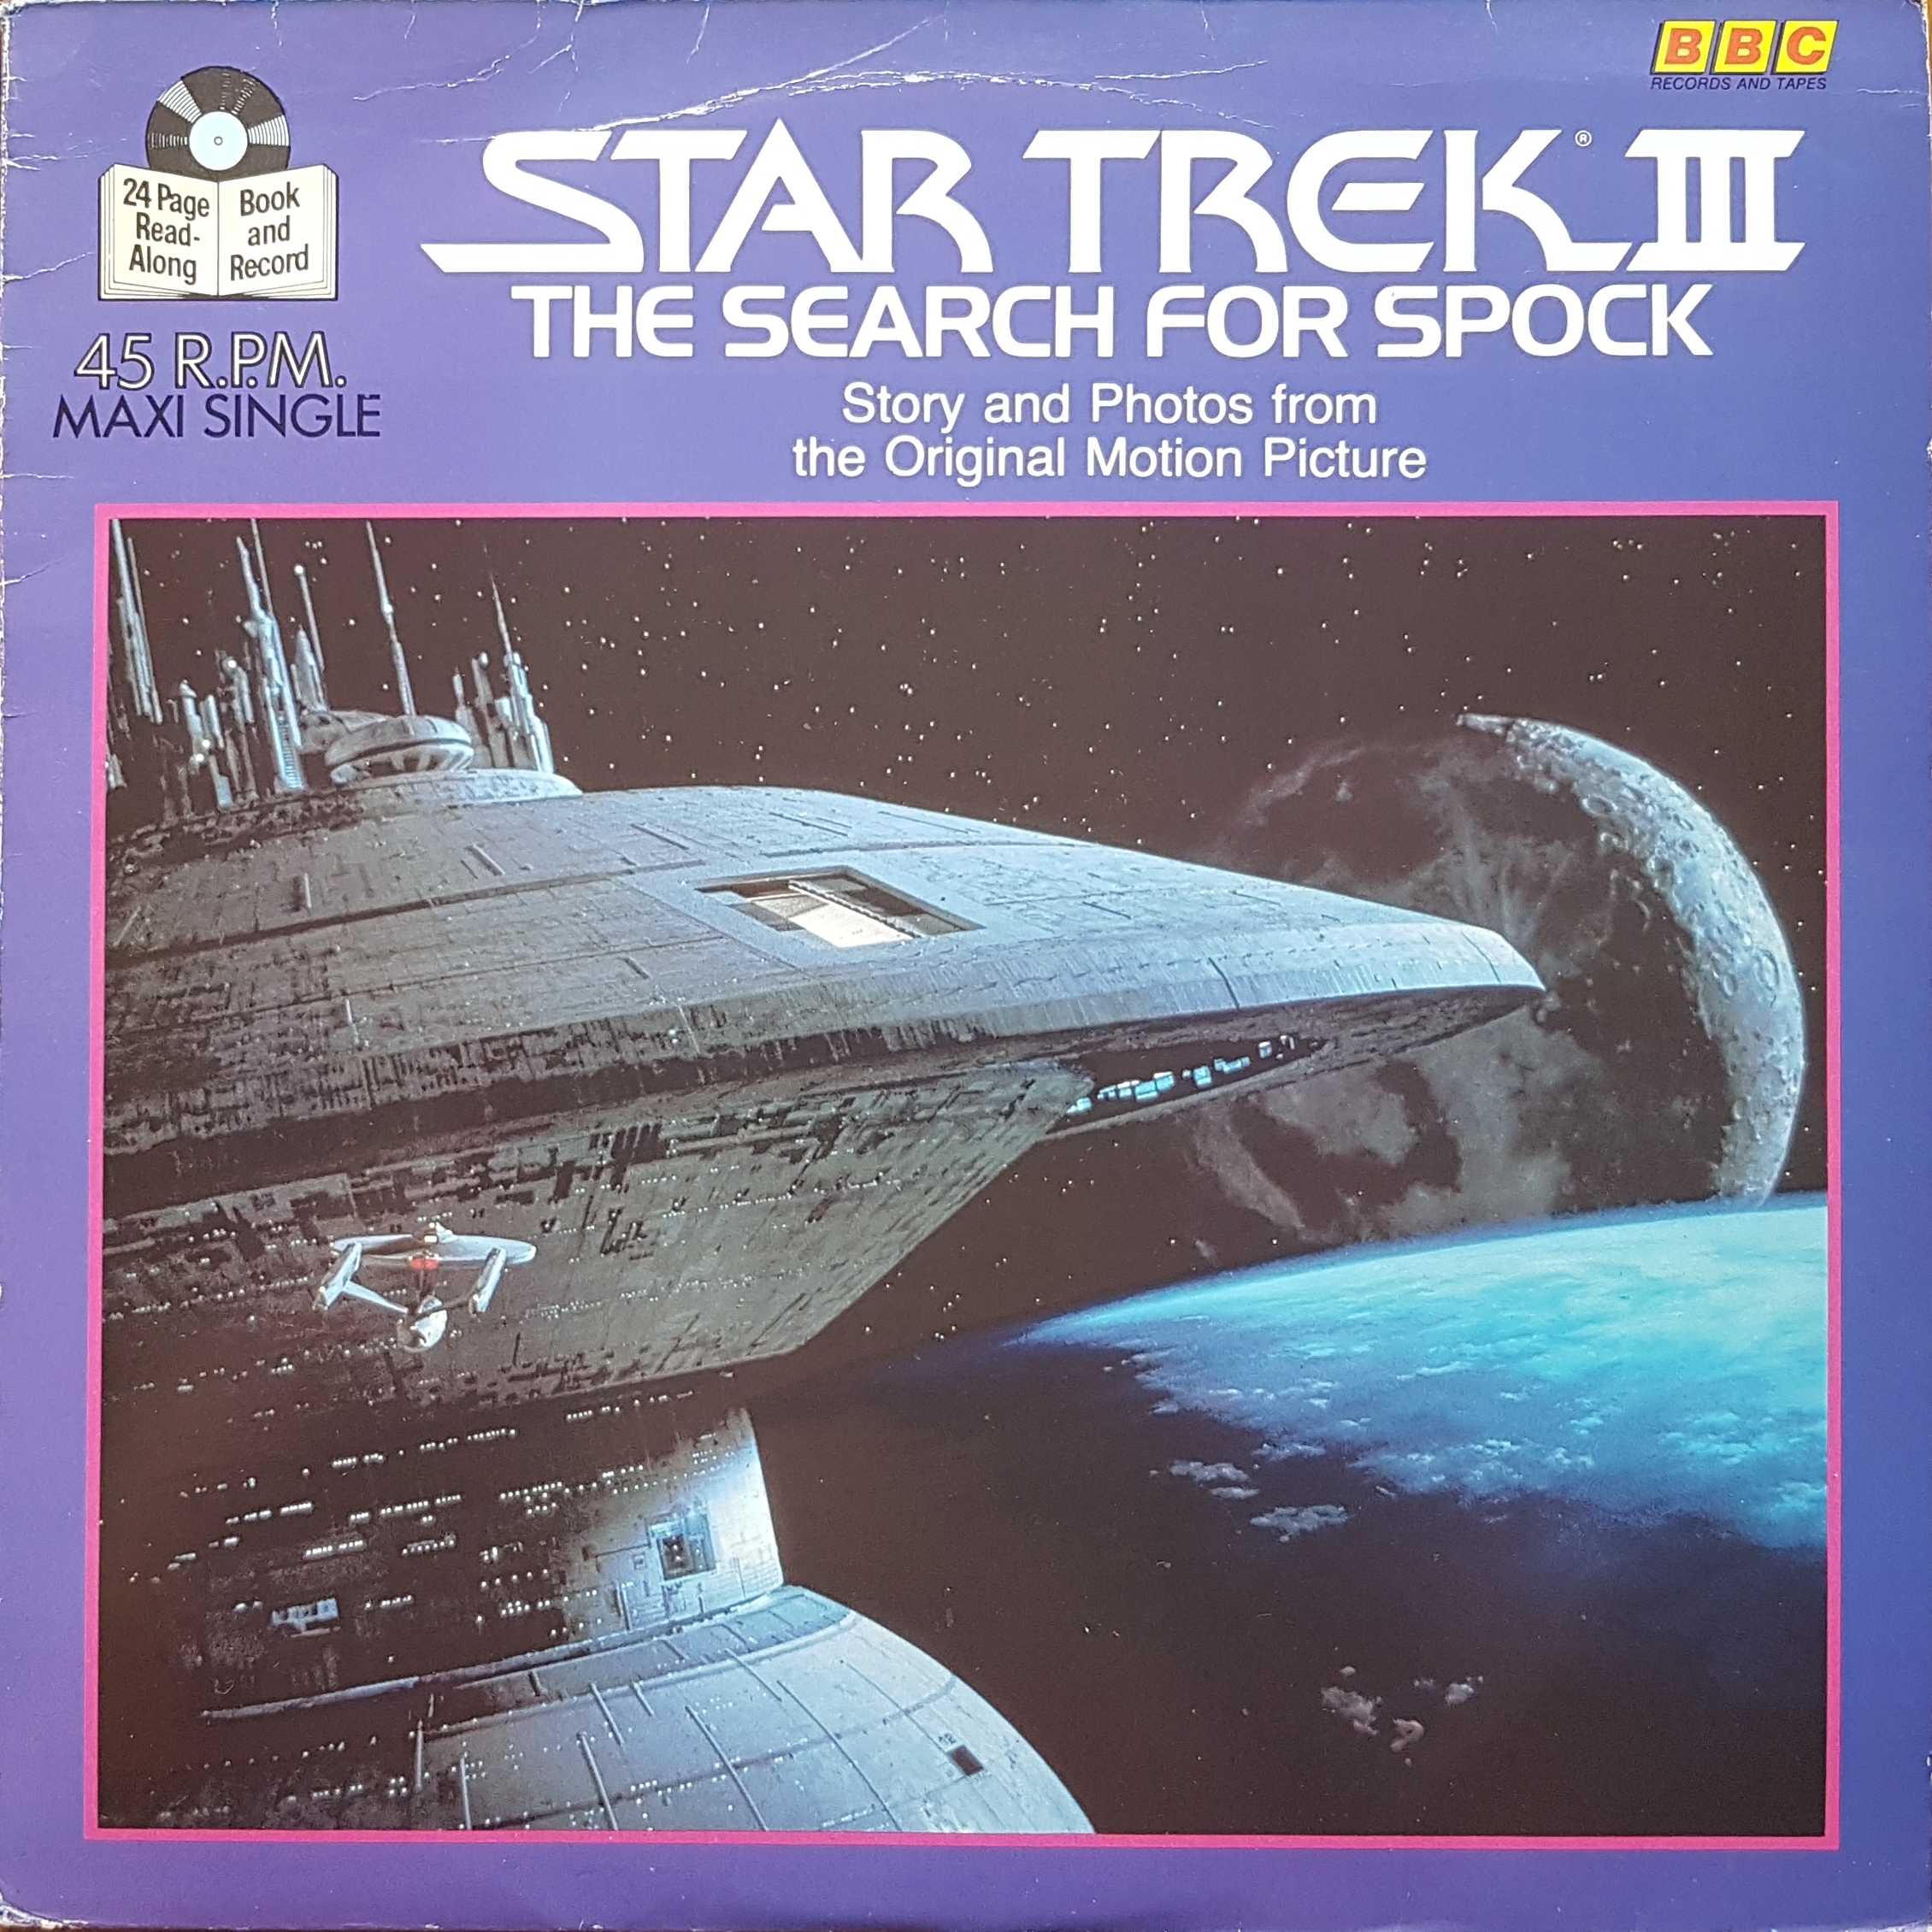 Picture of Star trek III - The search for Spock by artist Unknown from the BBC 12inches - Records and Tapes library